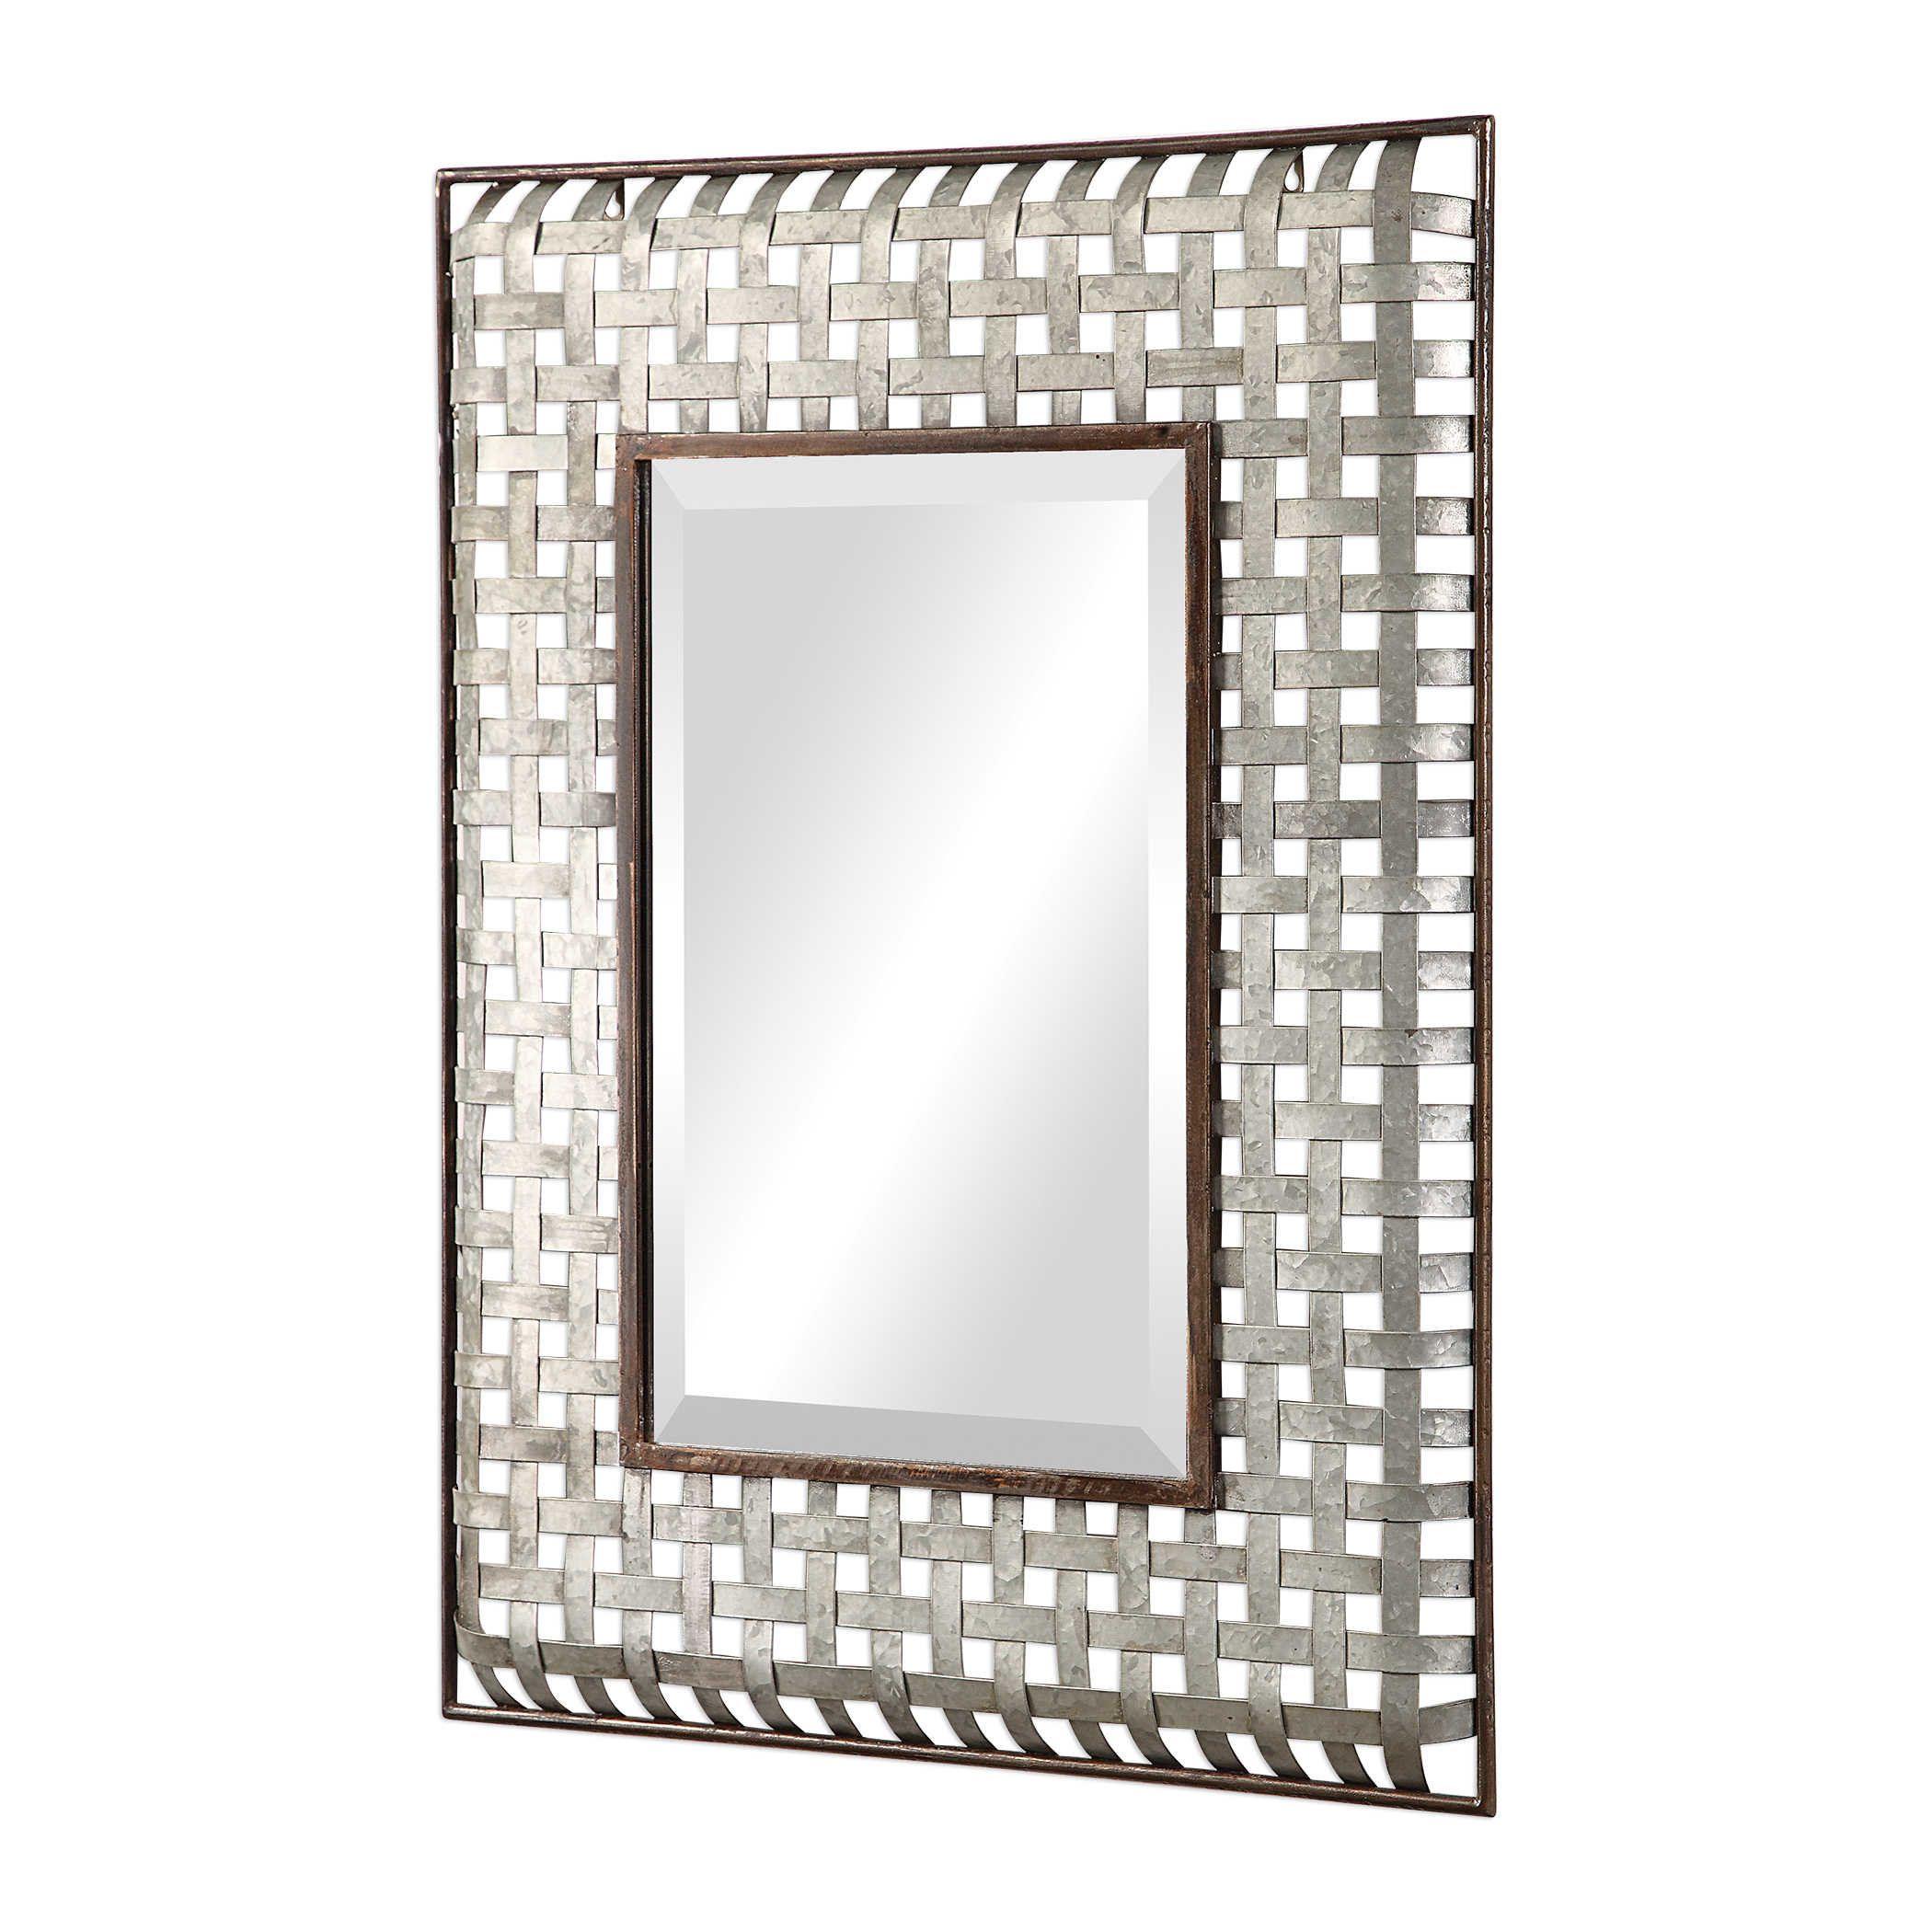 Trip Galvanized Metal Accent Mirror With Rectangle Antique Galvanized Metal Accent Mirrors (View 7 of 20)